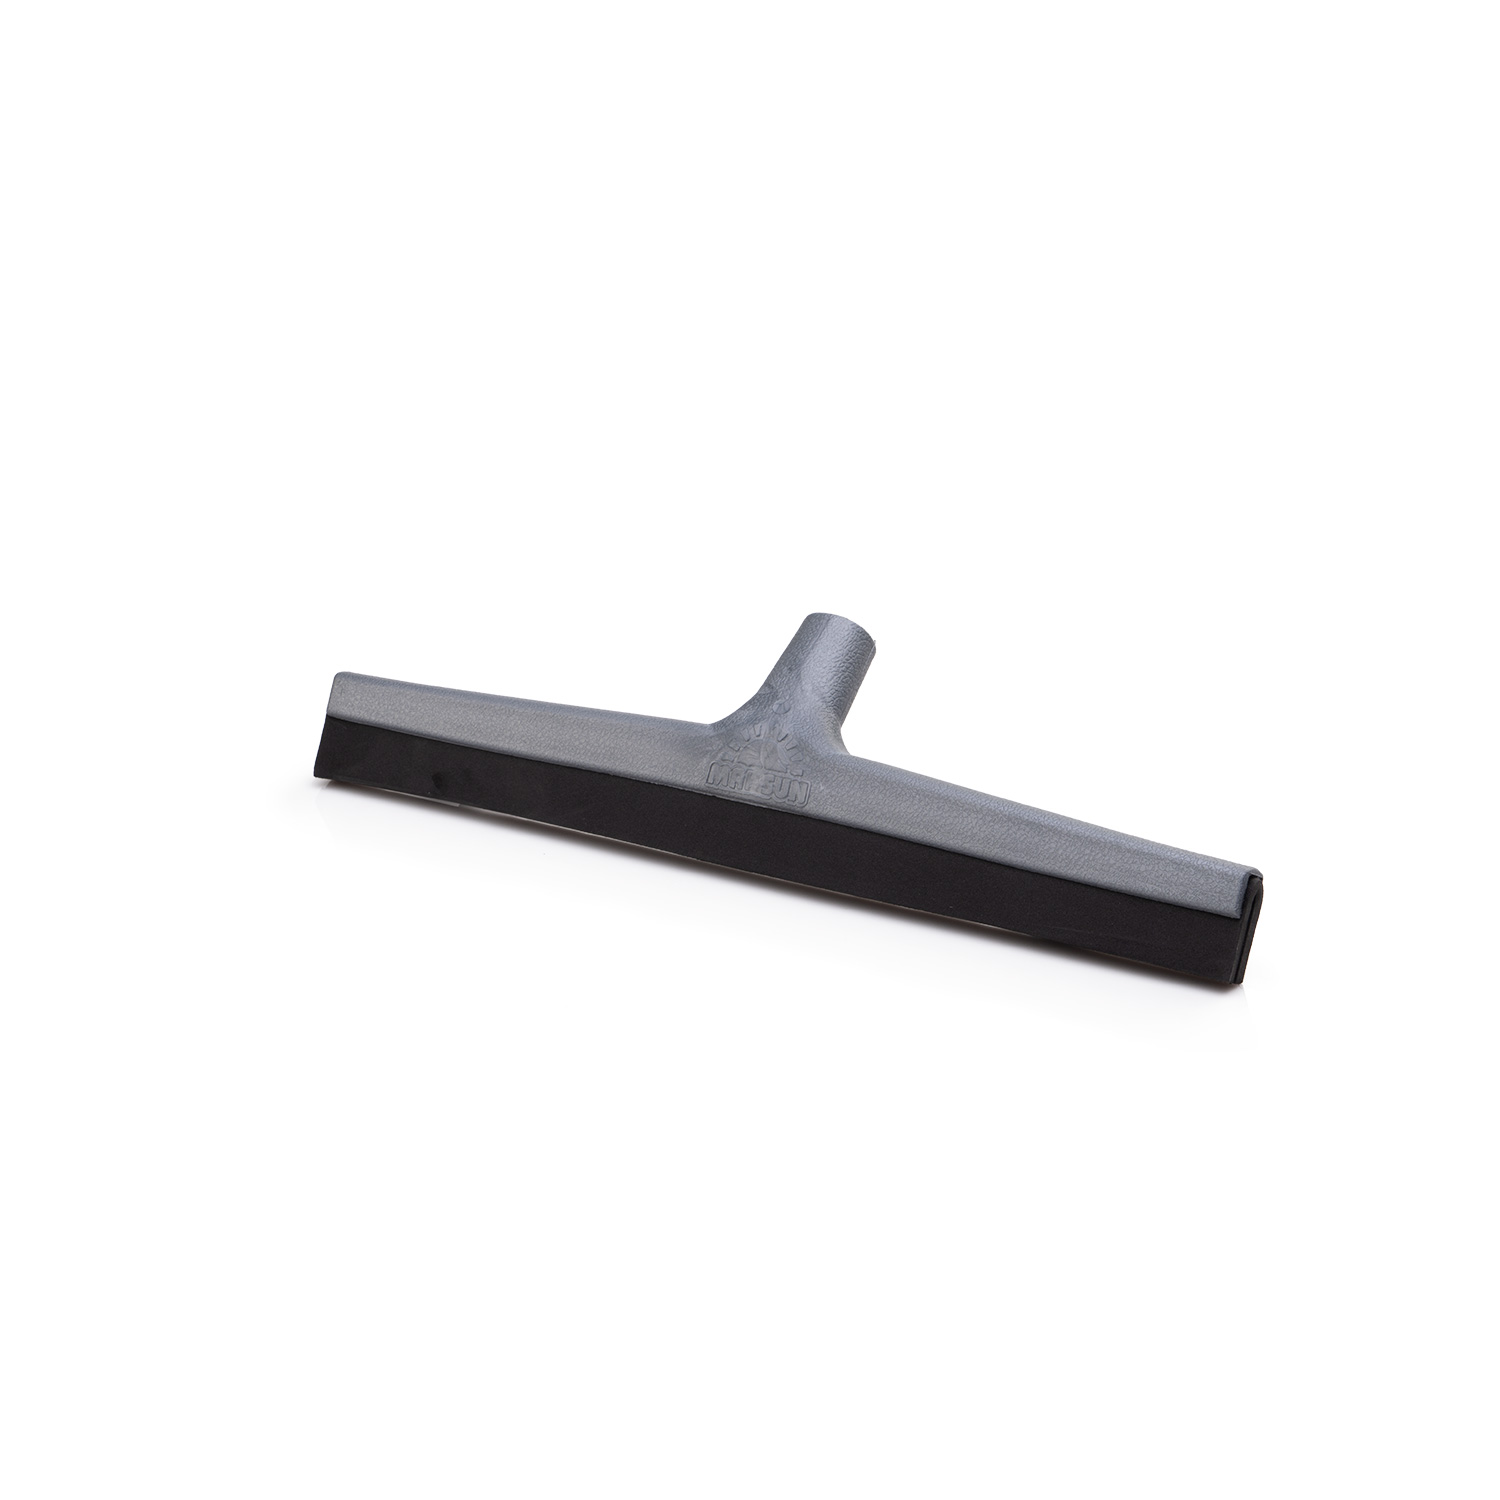 Mahsun / Plastic Squeegee (Whitout Handle)